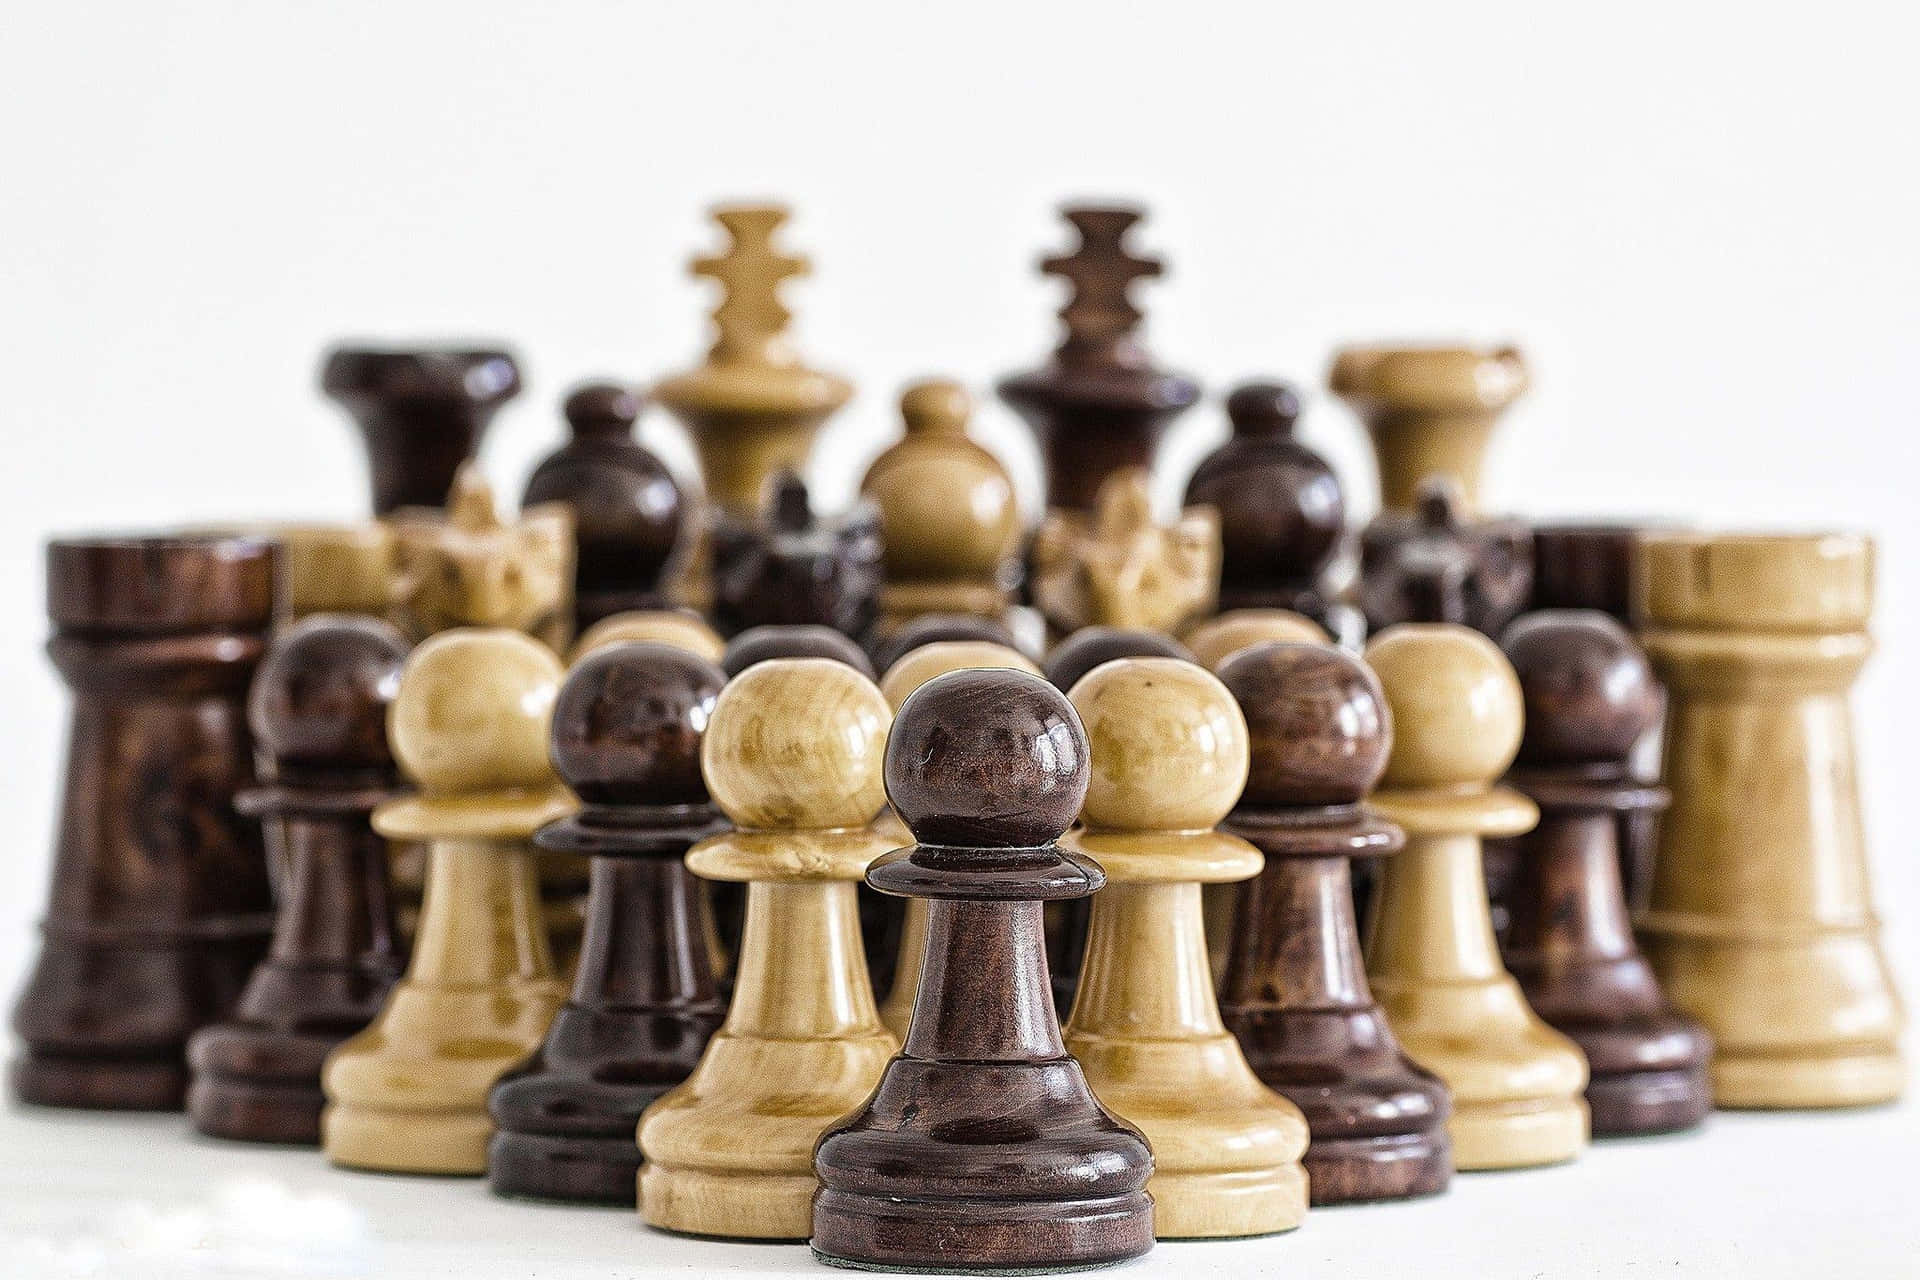 A Group Of Wooden Chess Pieces On A White Background